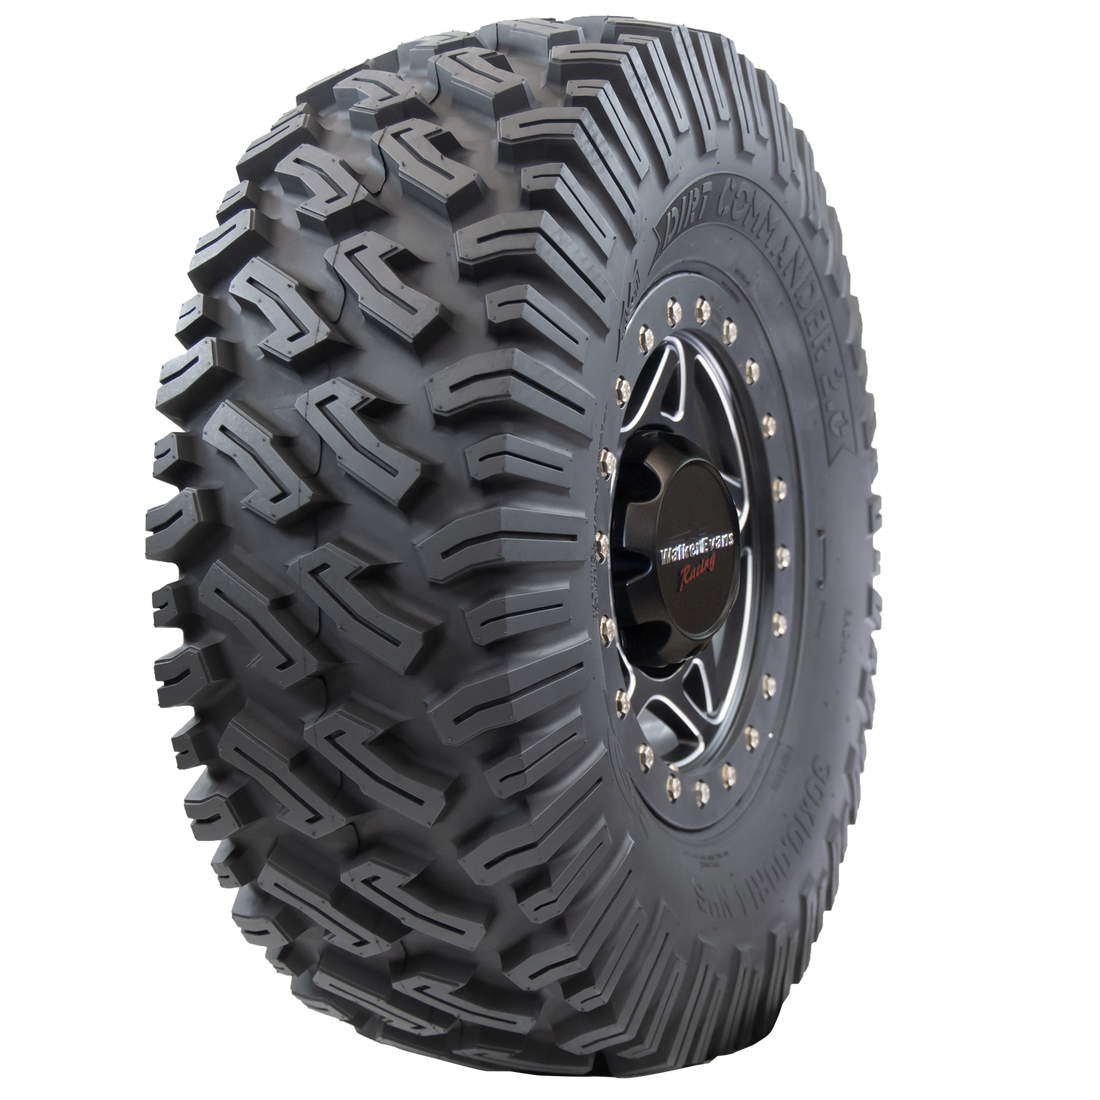 Angle view of Dirt Commander 2.0 ATV/UTV tire, showing off the tread, a section of the sidewall, and the rim. The tire features a sturdy square shoulder profile for maintaining grip and bite, ensuring optimal performance even at extreme speeds and during sharp cornering.